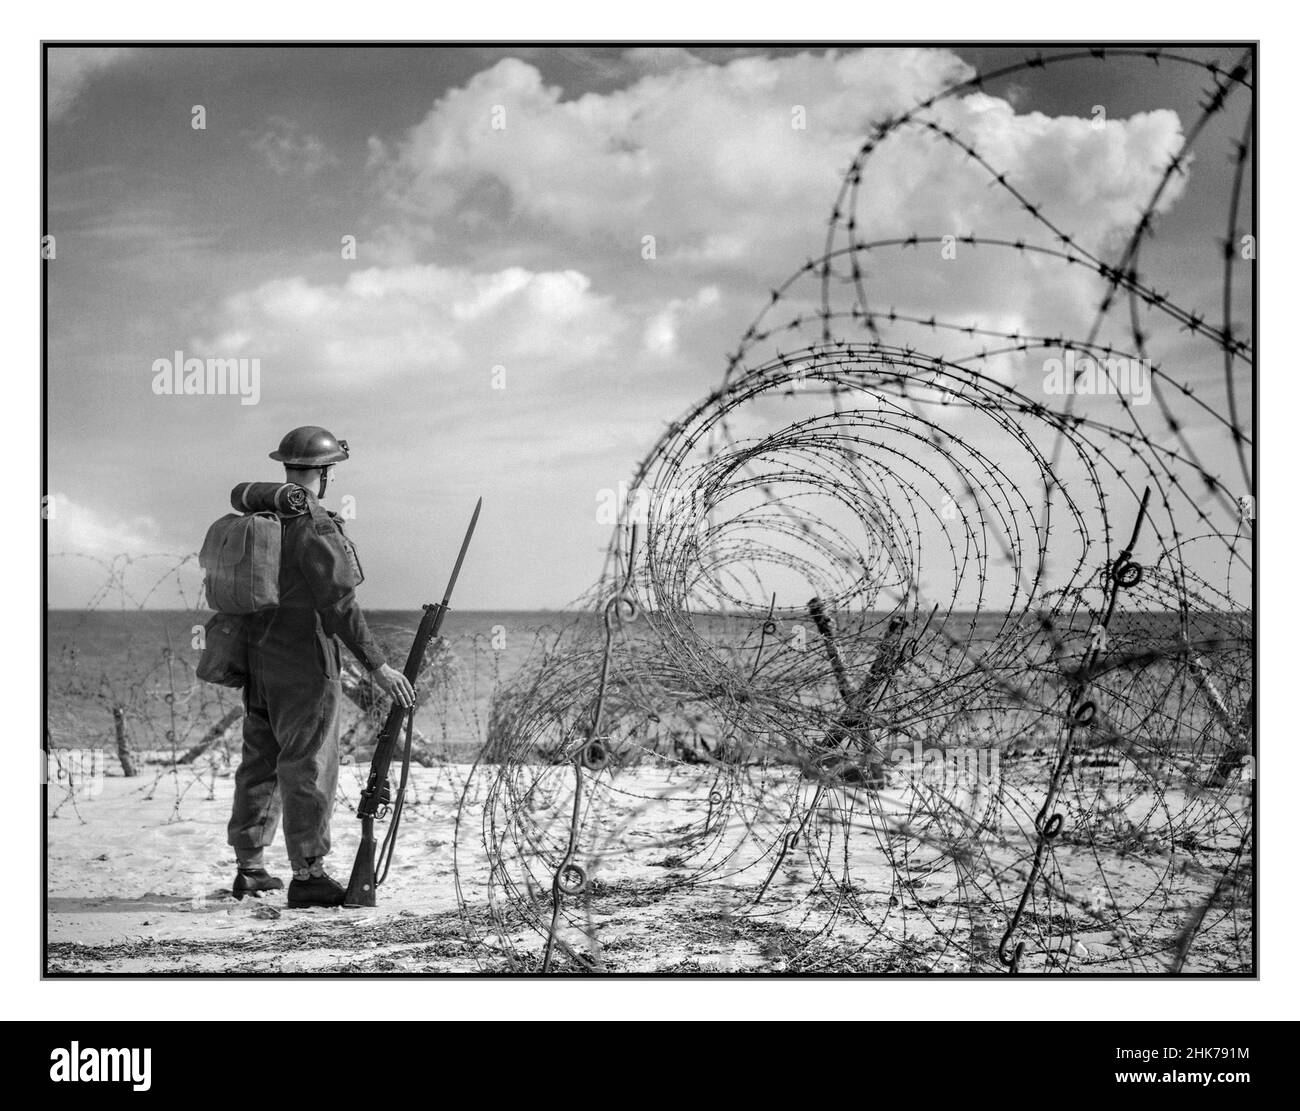 WW2 propaganda photograph of a British soldier in full wartime kit and uniform with rifle and fixed bayonet standing guard on a beach in southern England,  October 1940. World War II  British anti-invasion preparations of the Second World War entailed a large-scale division of military and civilian mobilisation in response to the threat of invasion (Operation Sea Lion) by German armed forces in 1940 and 1941. 1.5 million men were enrolled as part-time soldiers in the Home Guard. The rapid construction of field fortifications transformed much of the United Kingdom, especially southern England, Stock Photo